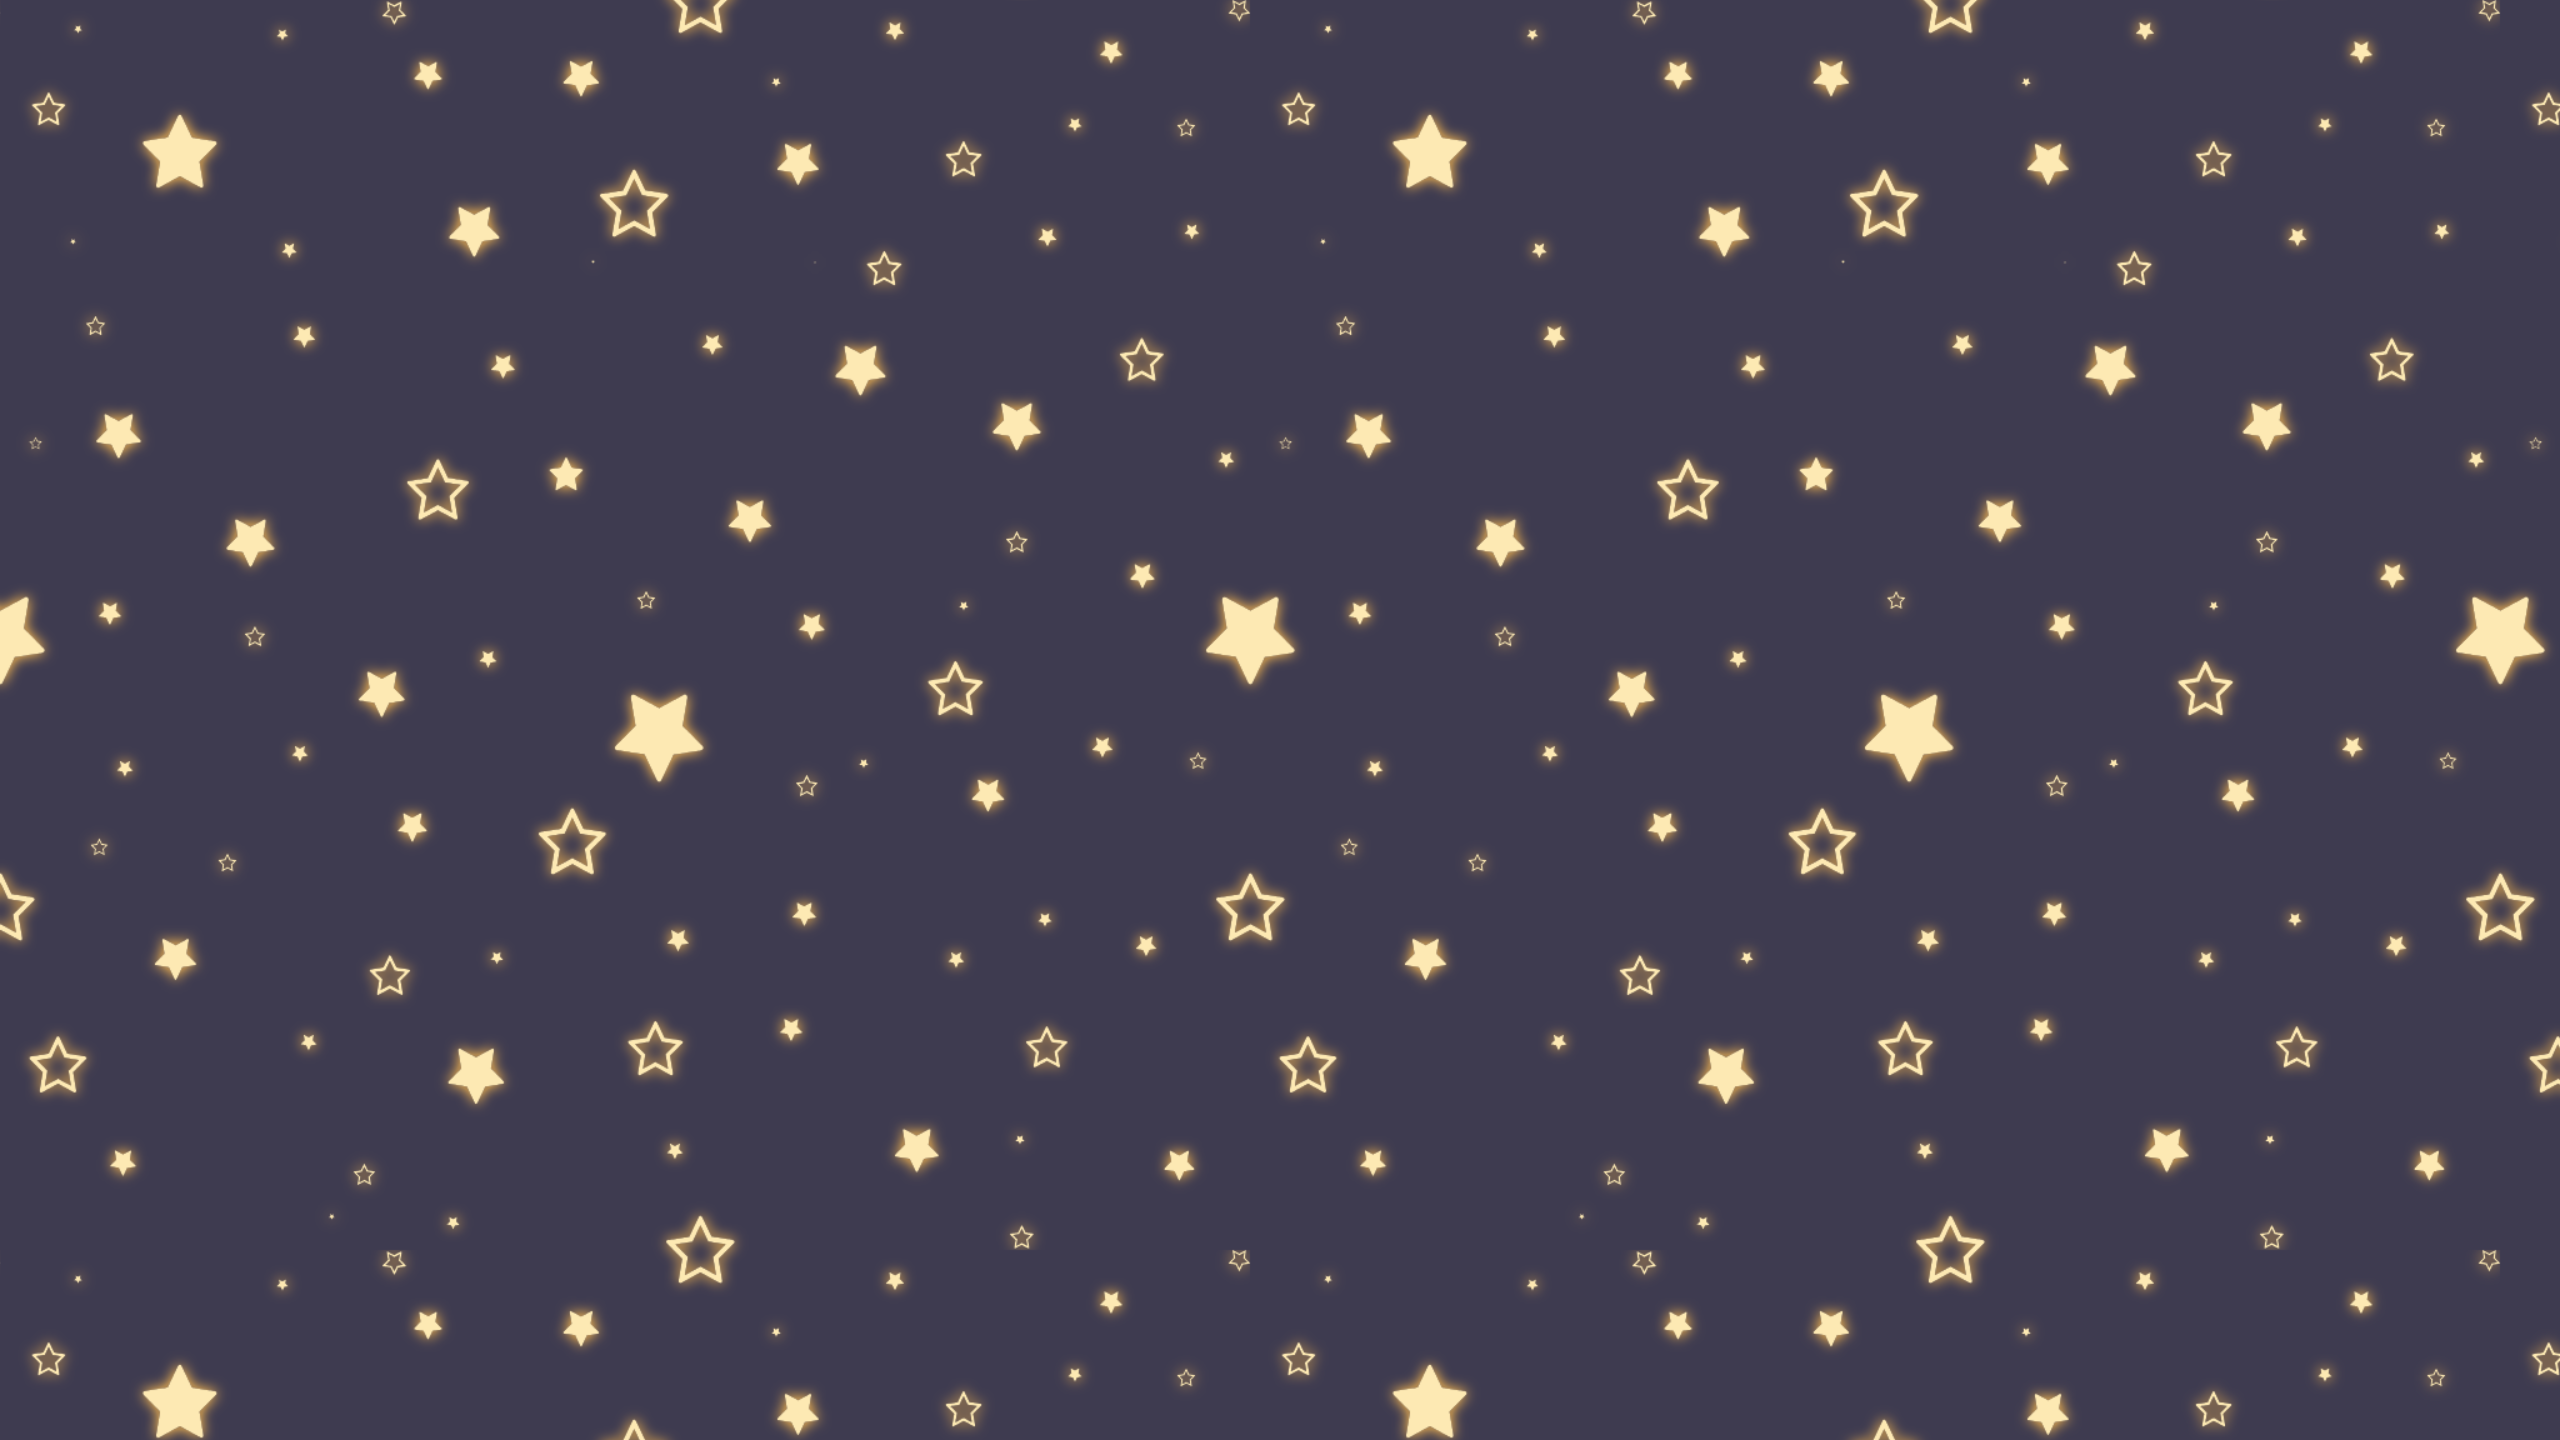 Design A Glowing Star Pattern And Turn It Into A Background!. Star patterns, Pixlr, Pattern